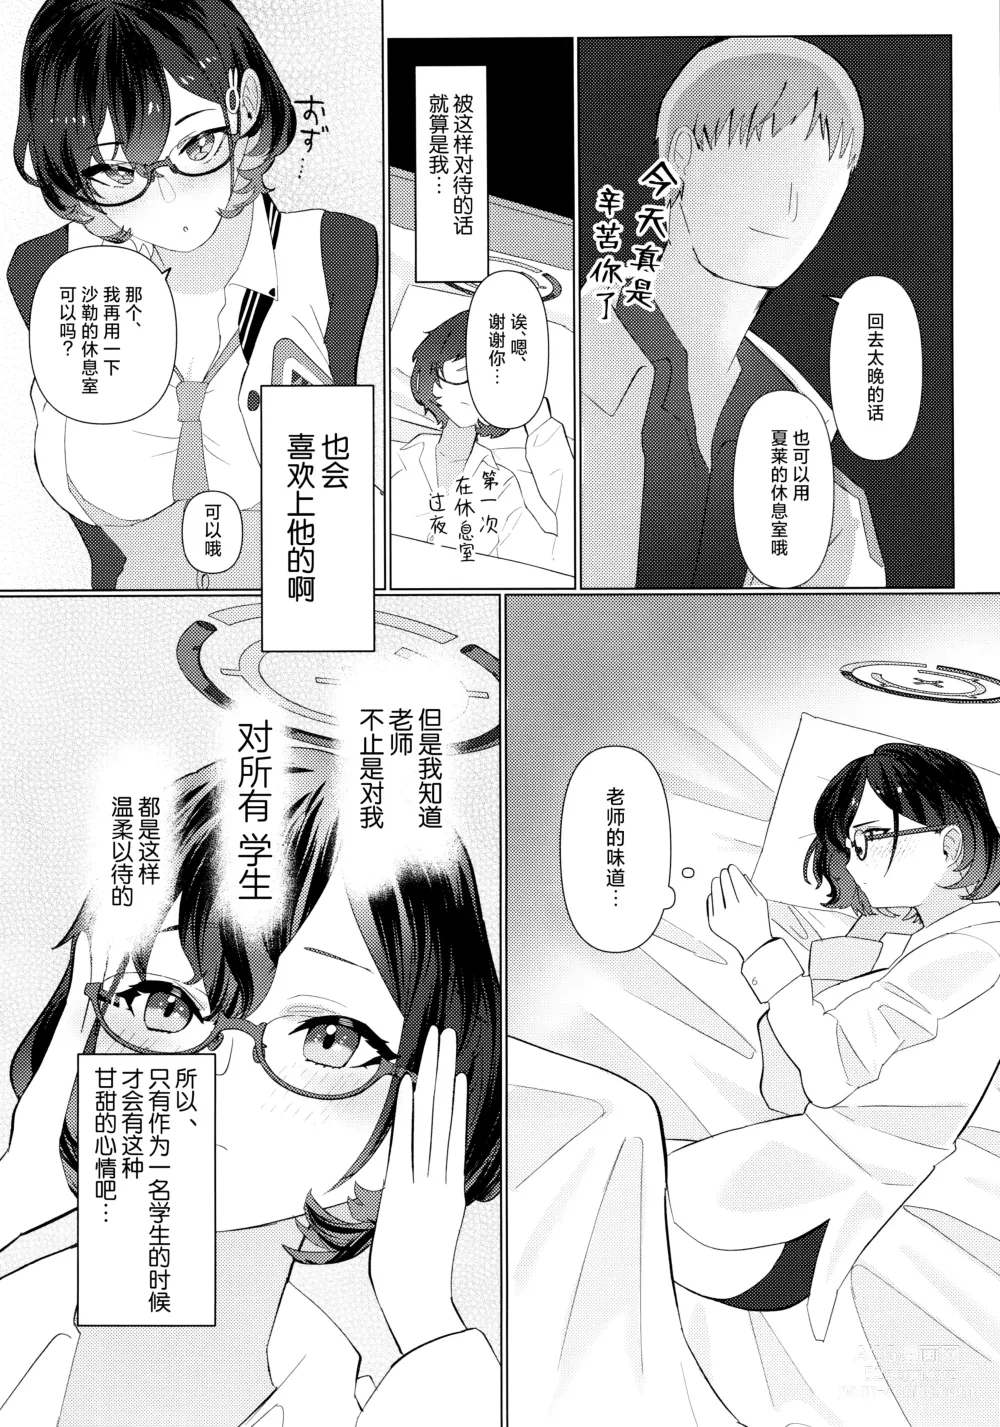 Page 7 of doujinshi 第一次的教学